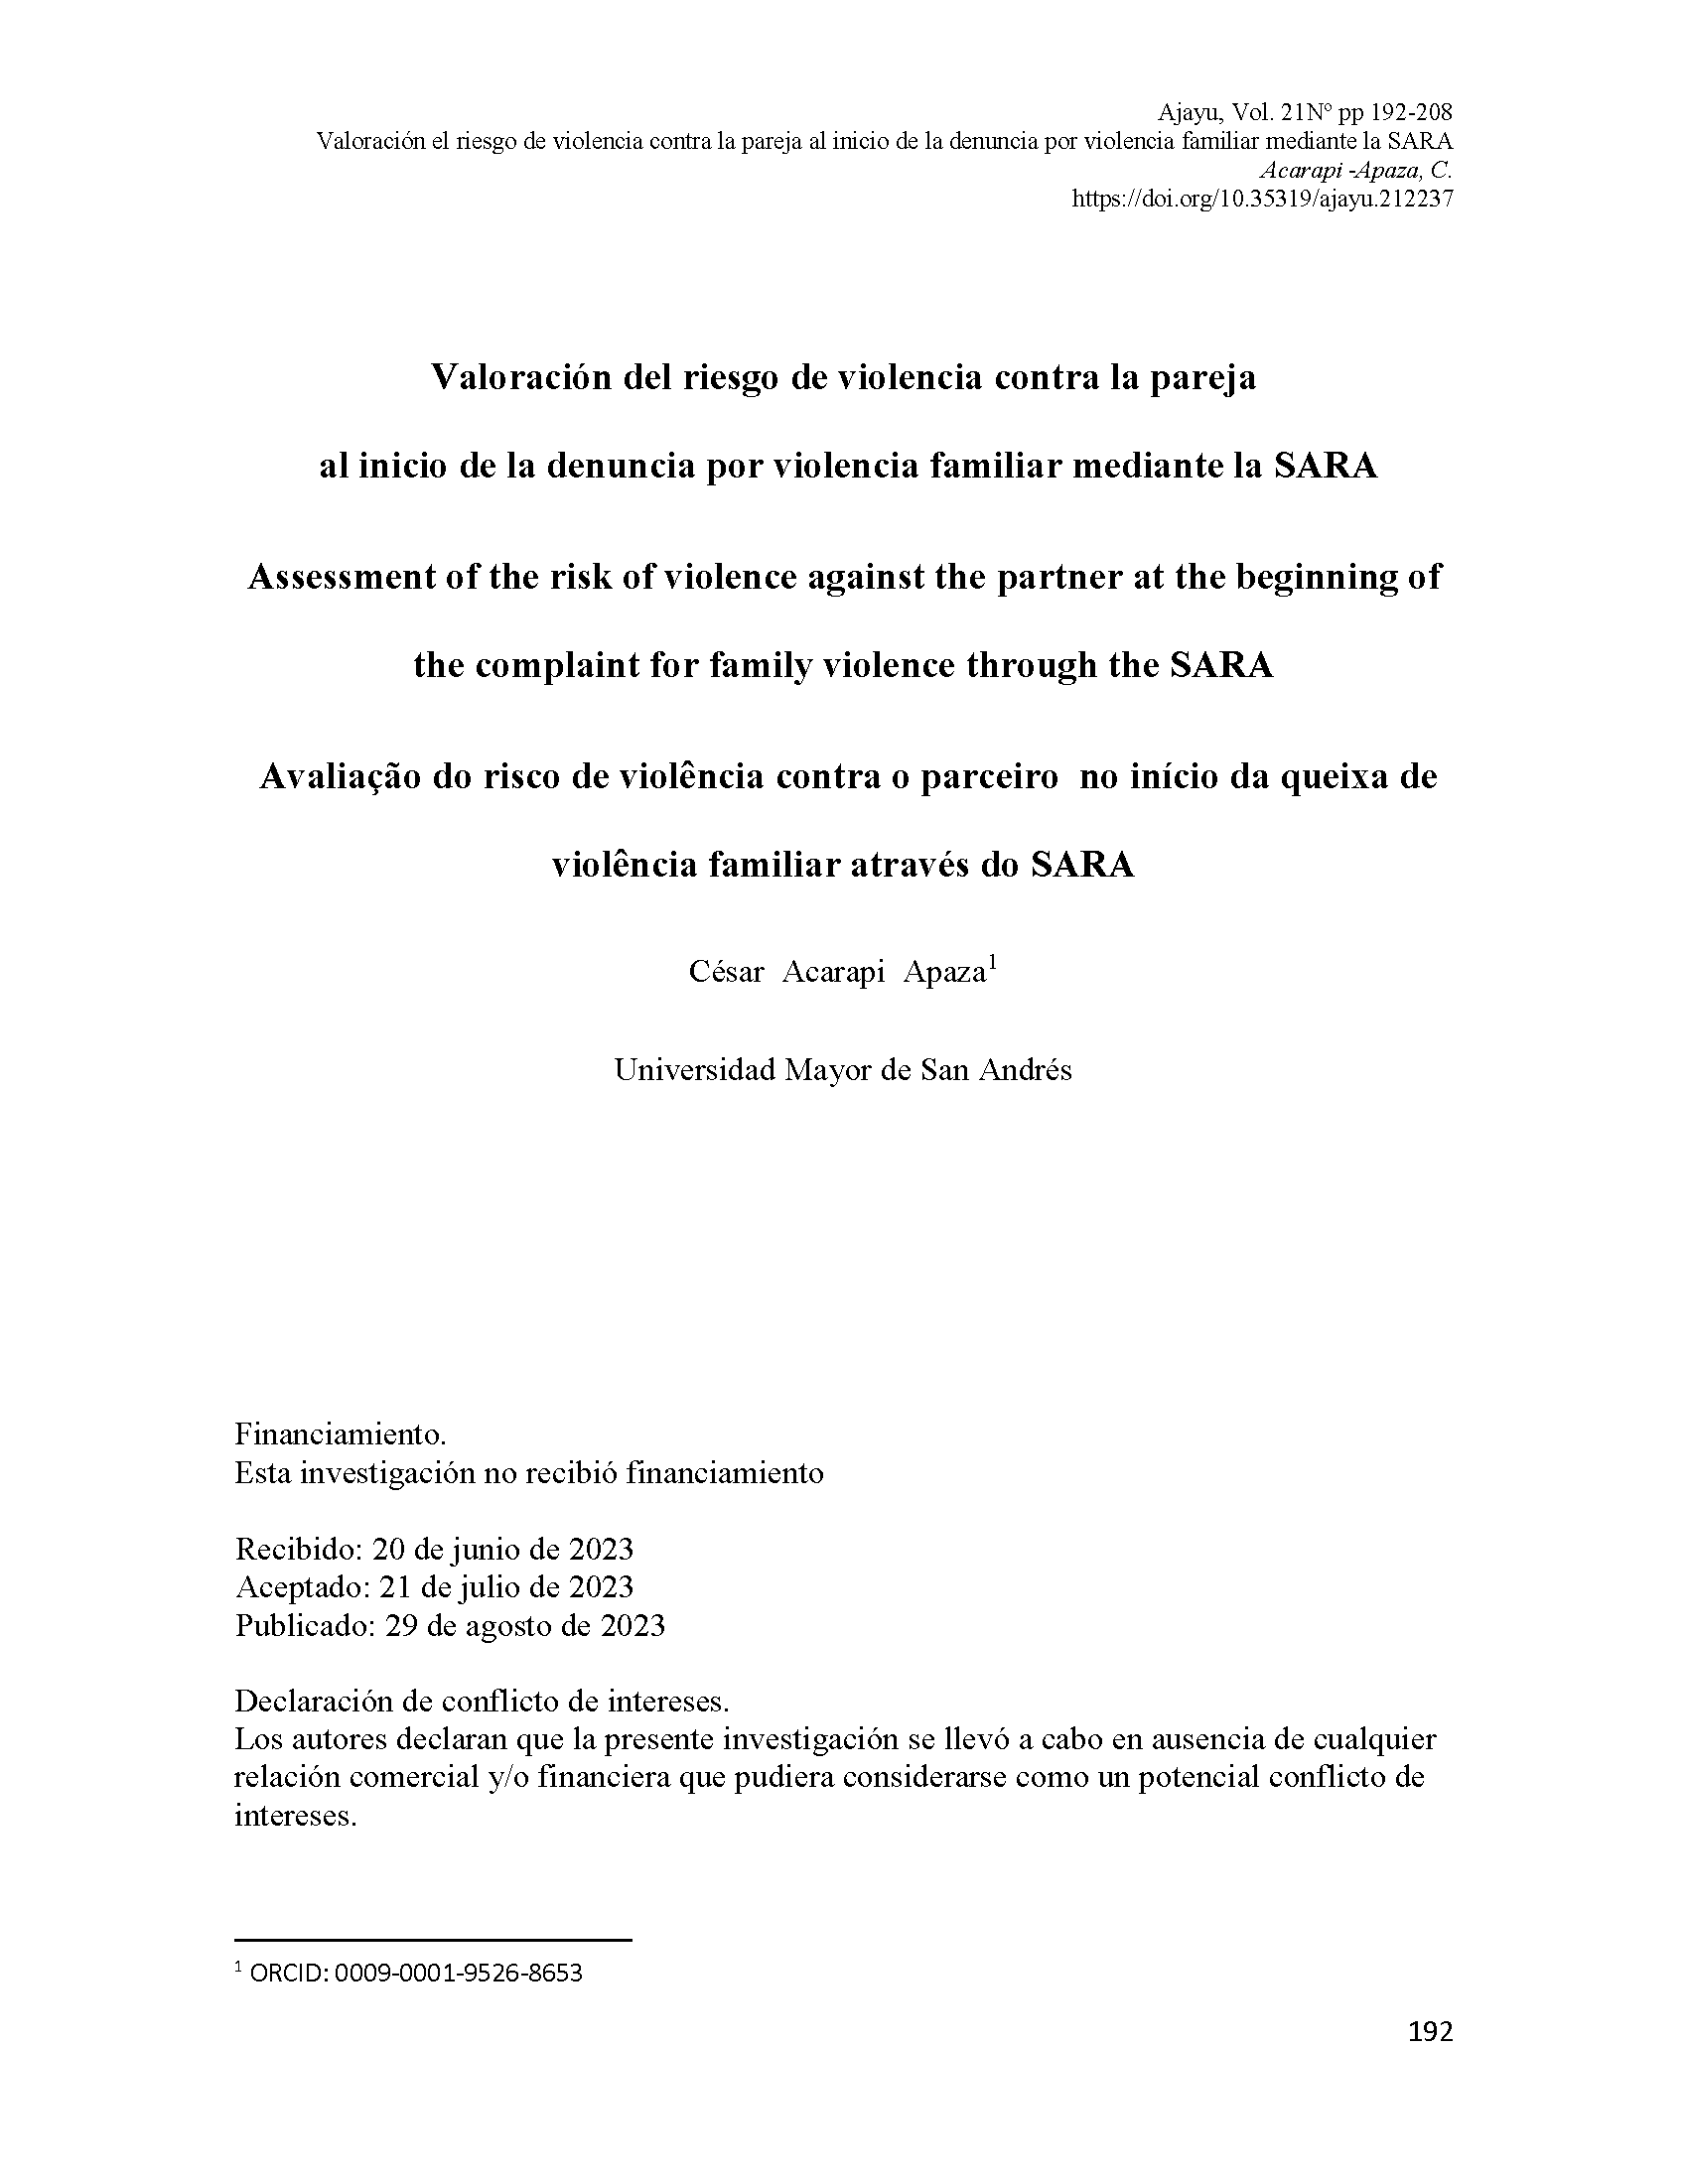 Assessment of the risk of violence against the partner at the beginning of the complaint for family violence through the SARA